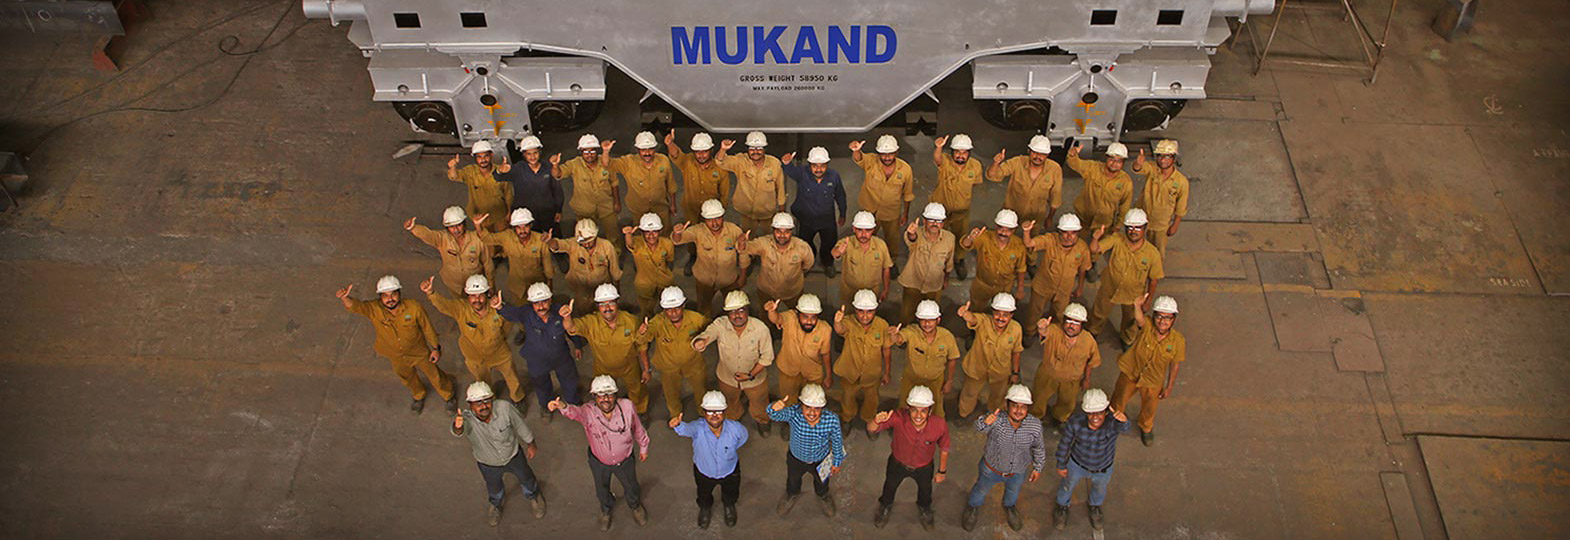 Mukand - 2400+ Employees Working Towards a Sustainable Future